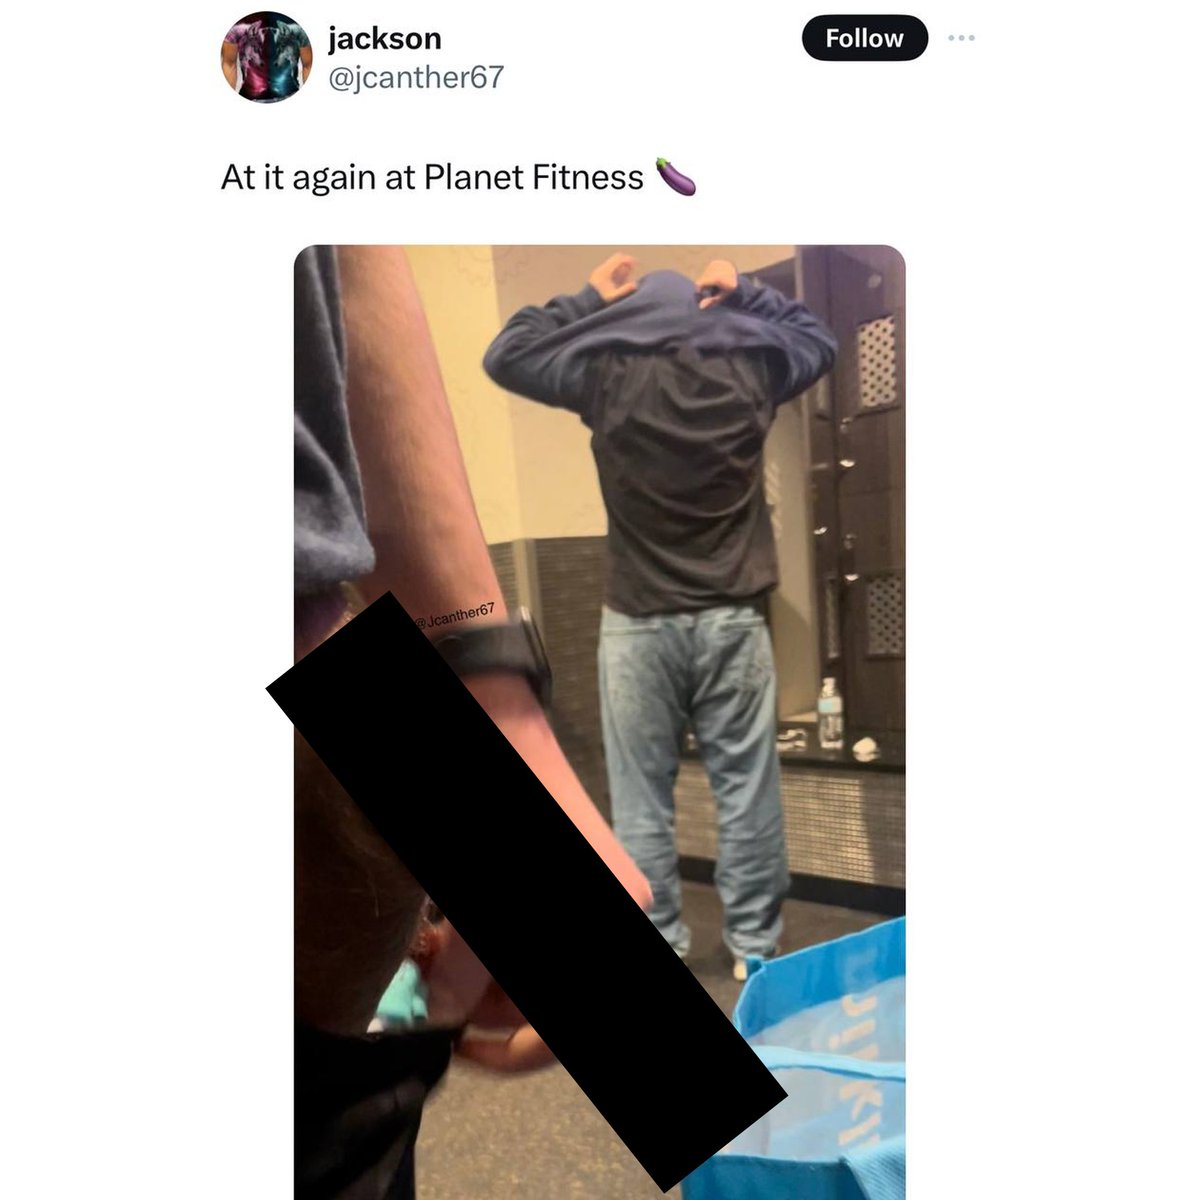 SHOCKING: Disgusting p*rvert takes photos of his exposed p*n*s and m*st*rb*tes in front of customers at @PlanetFitness.

This is the environment that Planet Fitness fosters.

What's stopping these p*rverts from just walking into women's bathrooms at Planet Fitness? Is ANYONE safe